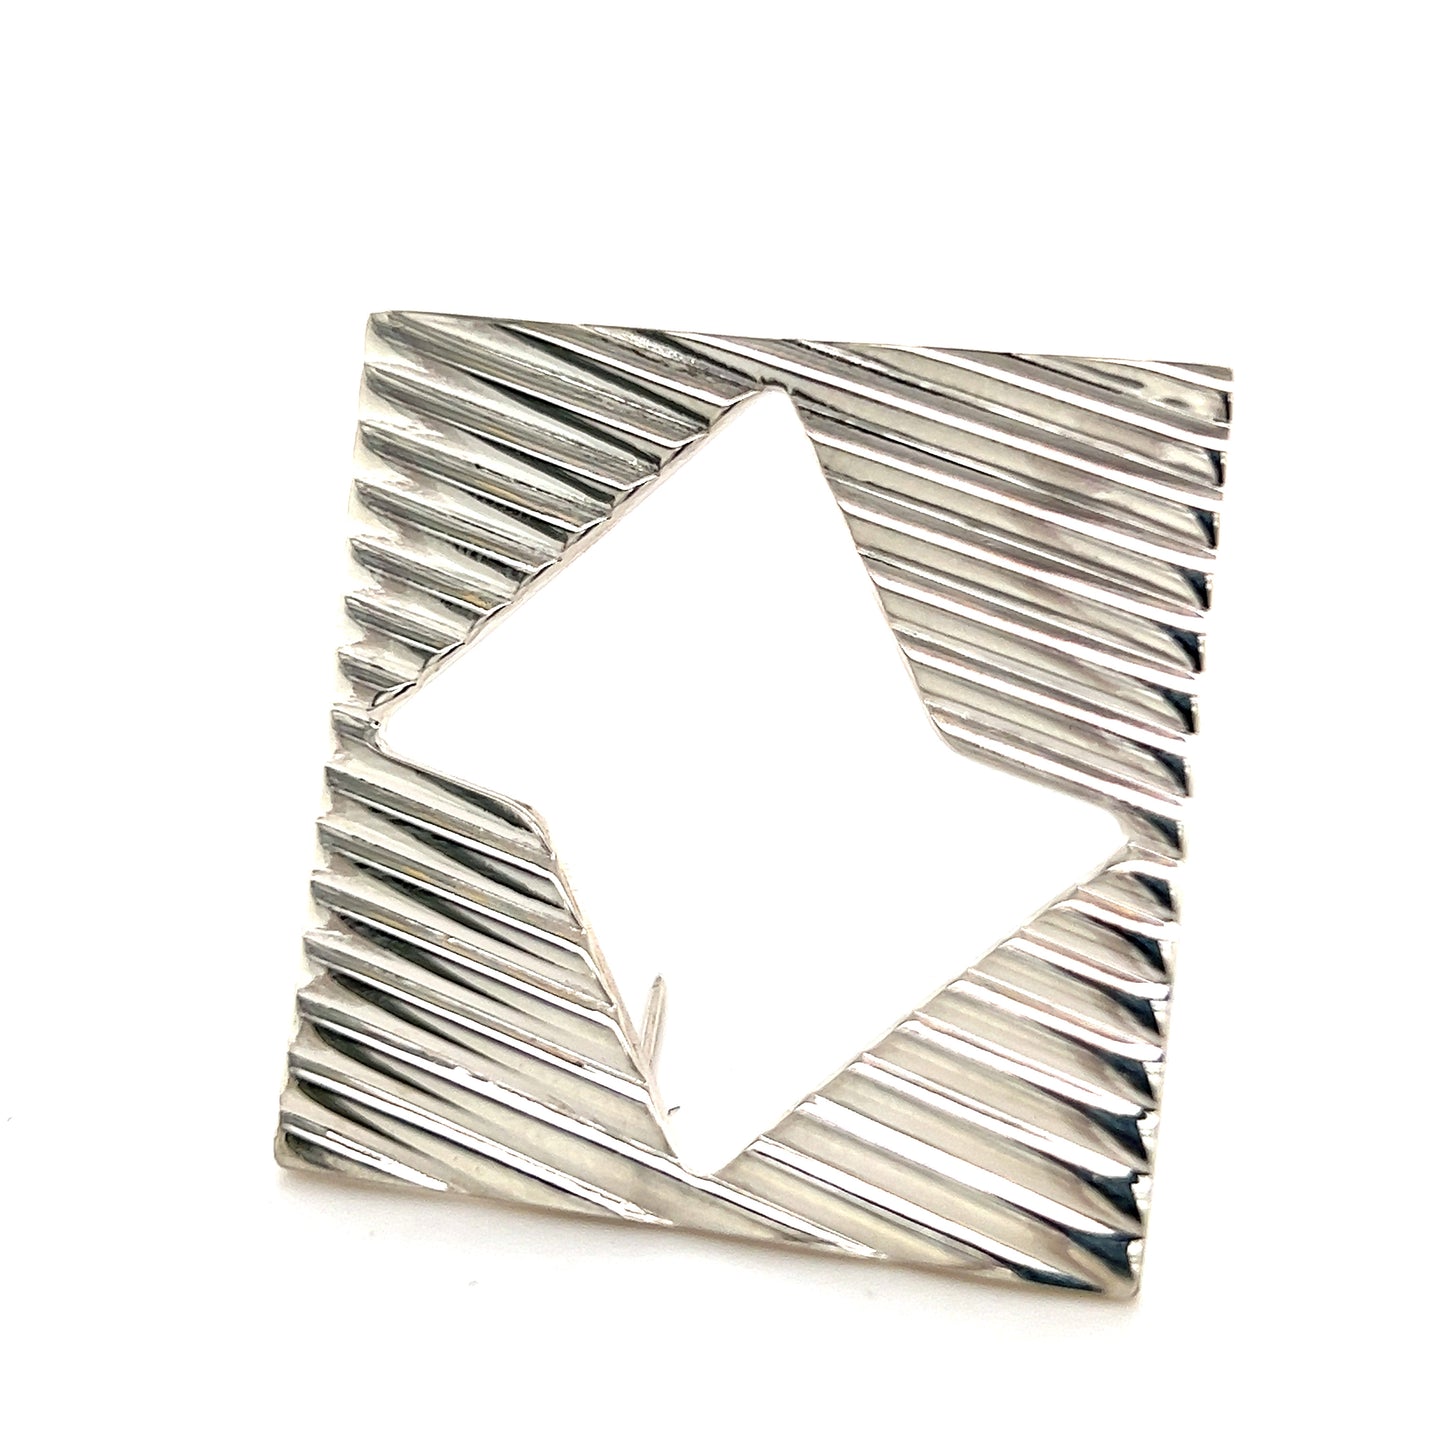 Tiffany & Co Estate Abstract Brooch Sterling Silver 14.8 Grams TIF221 - Certified Fine Jewelry